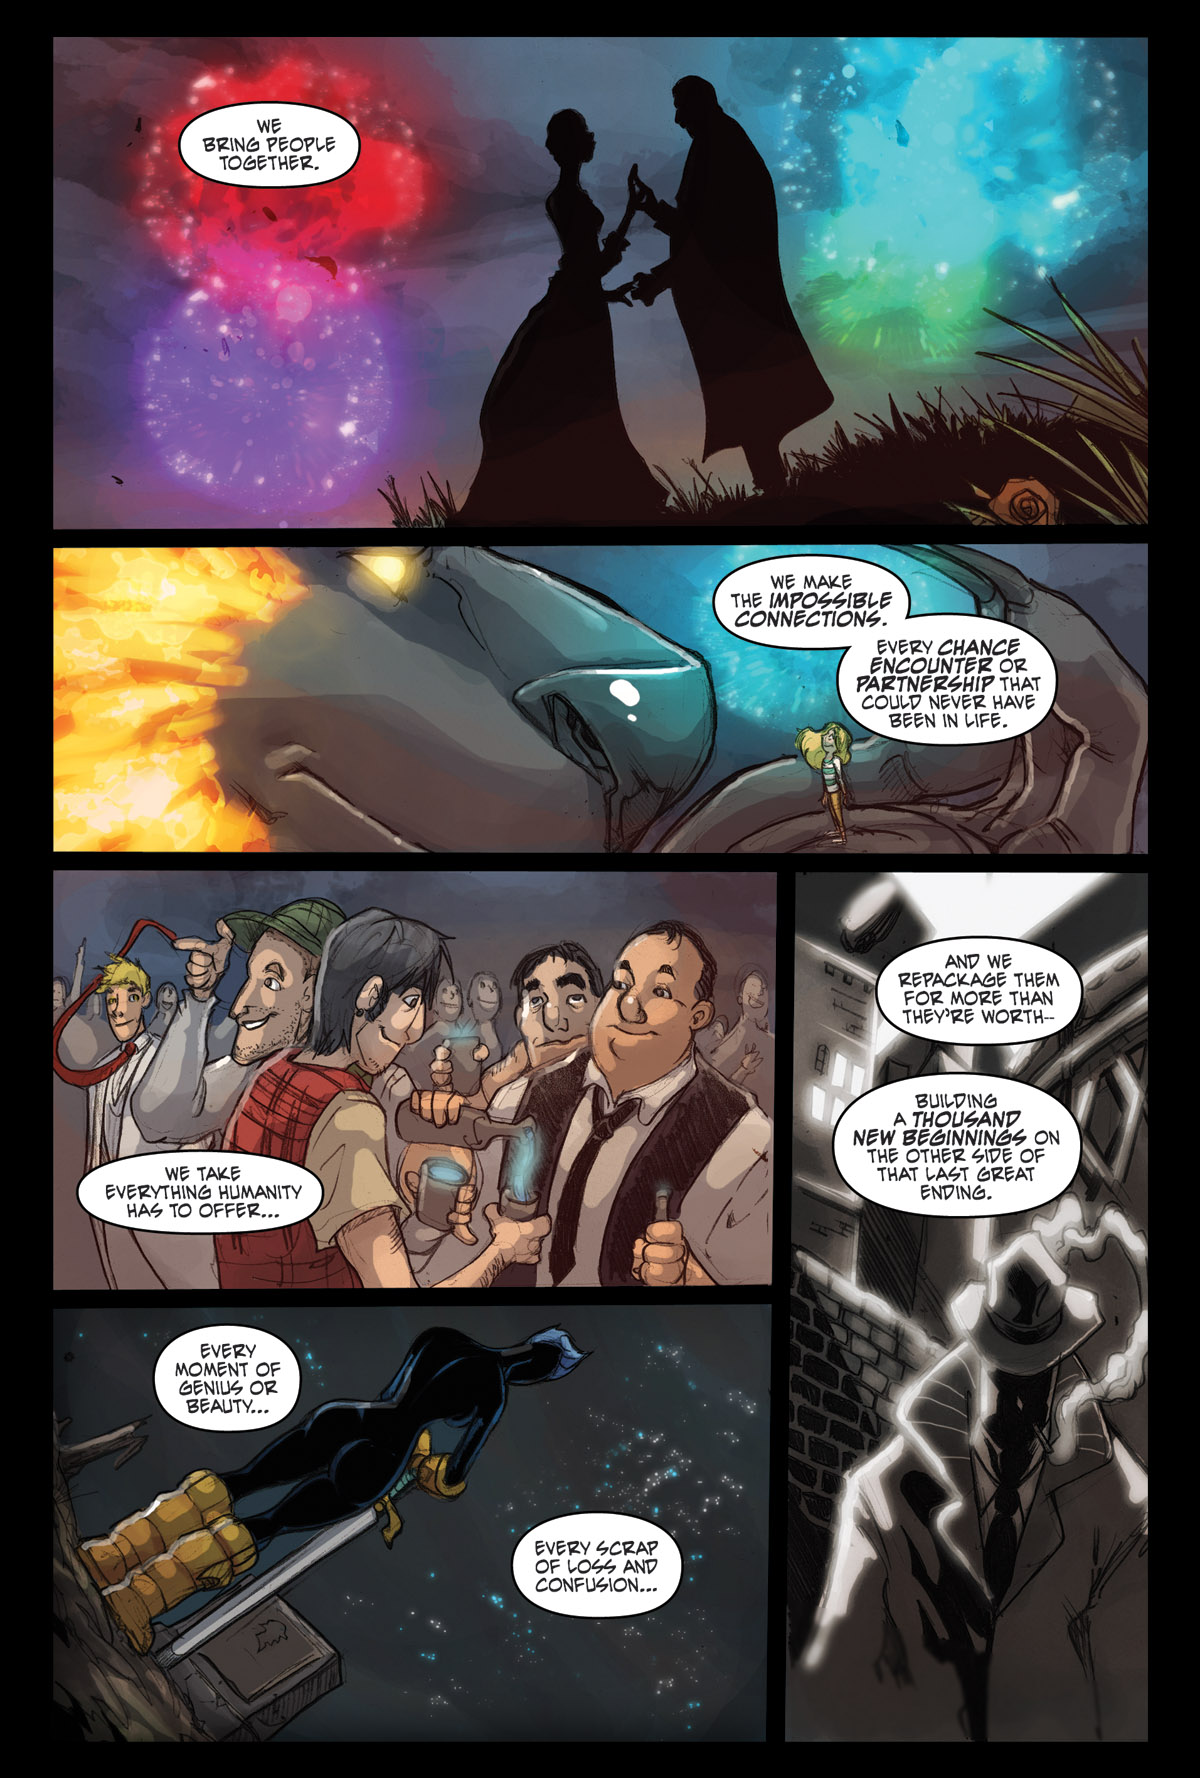 Afterlife Inc. | From Now On | Page 6